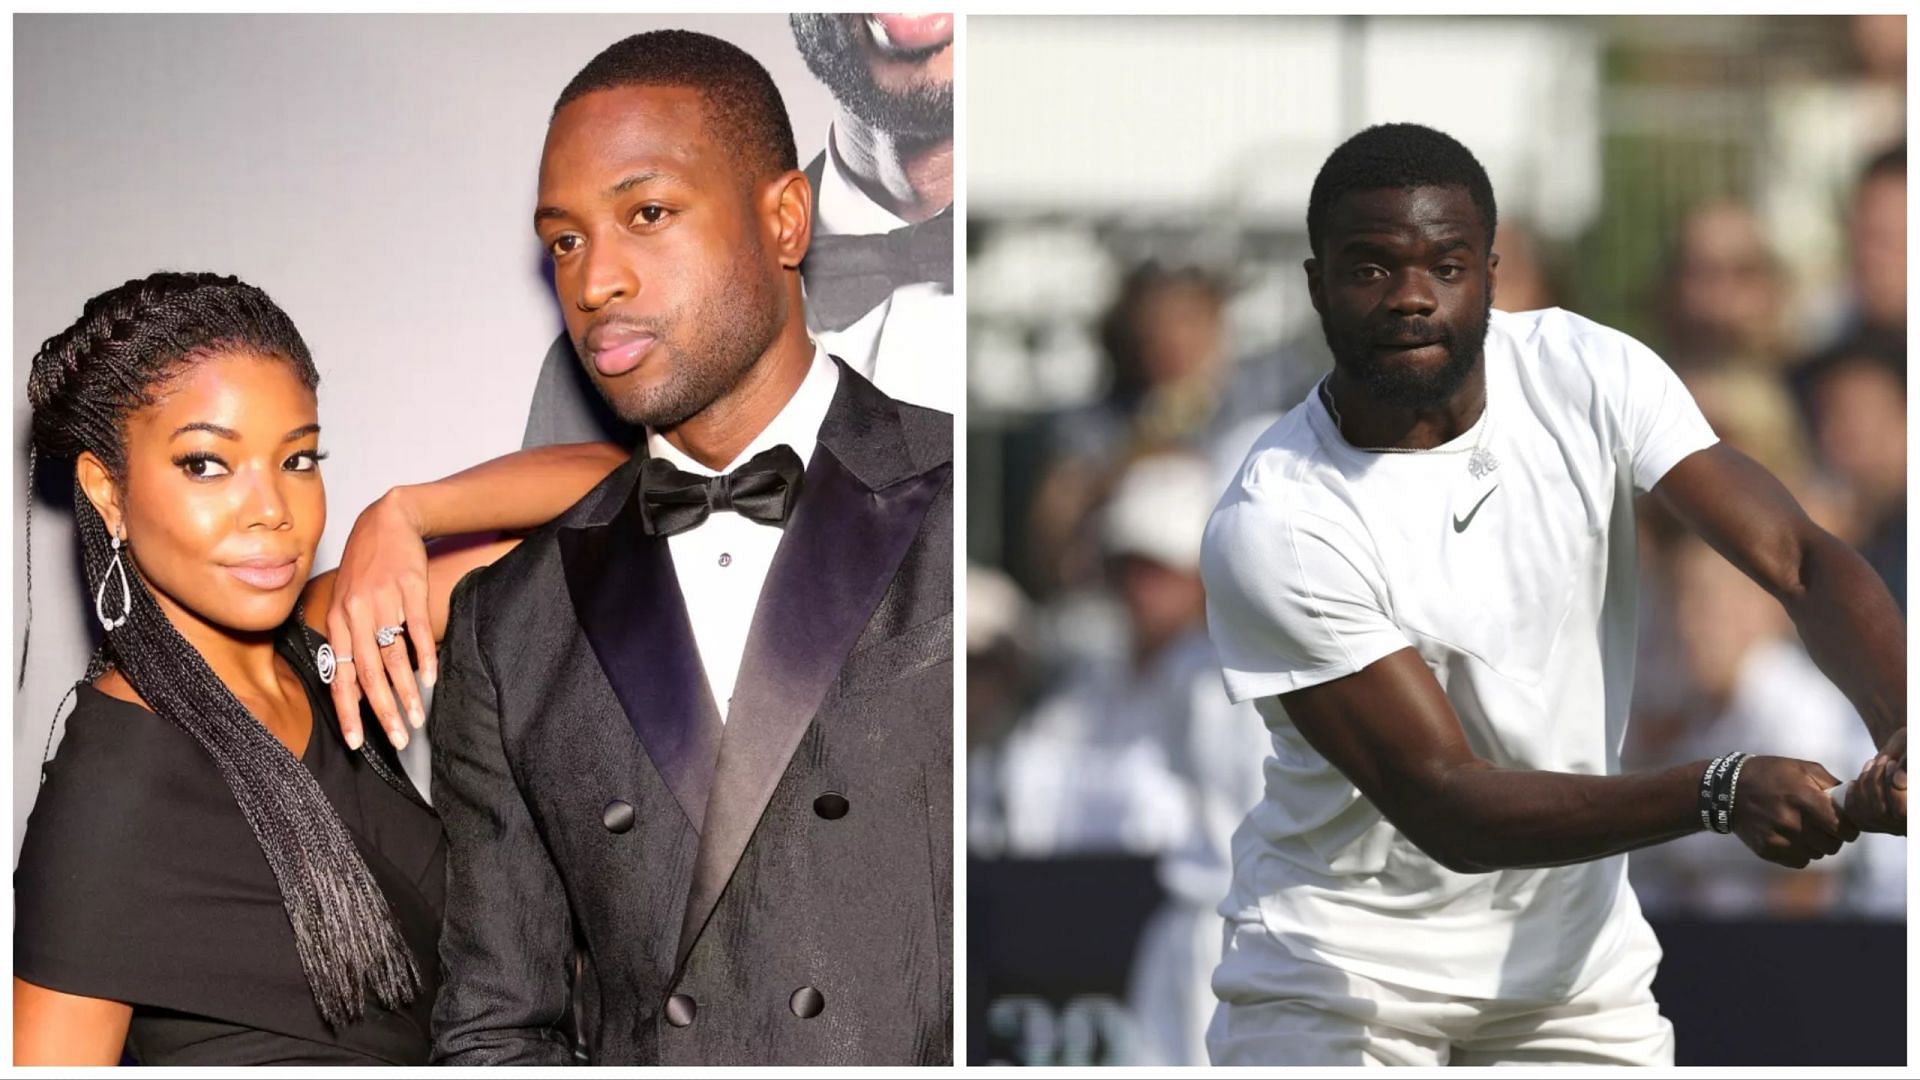 Tennis Star Frances Tiafoe (right) revealed that his celebrity crush was Dwyane Wade